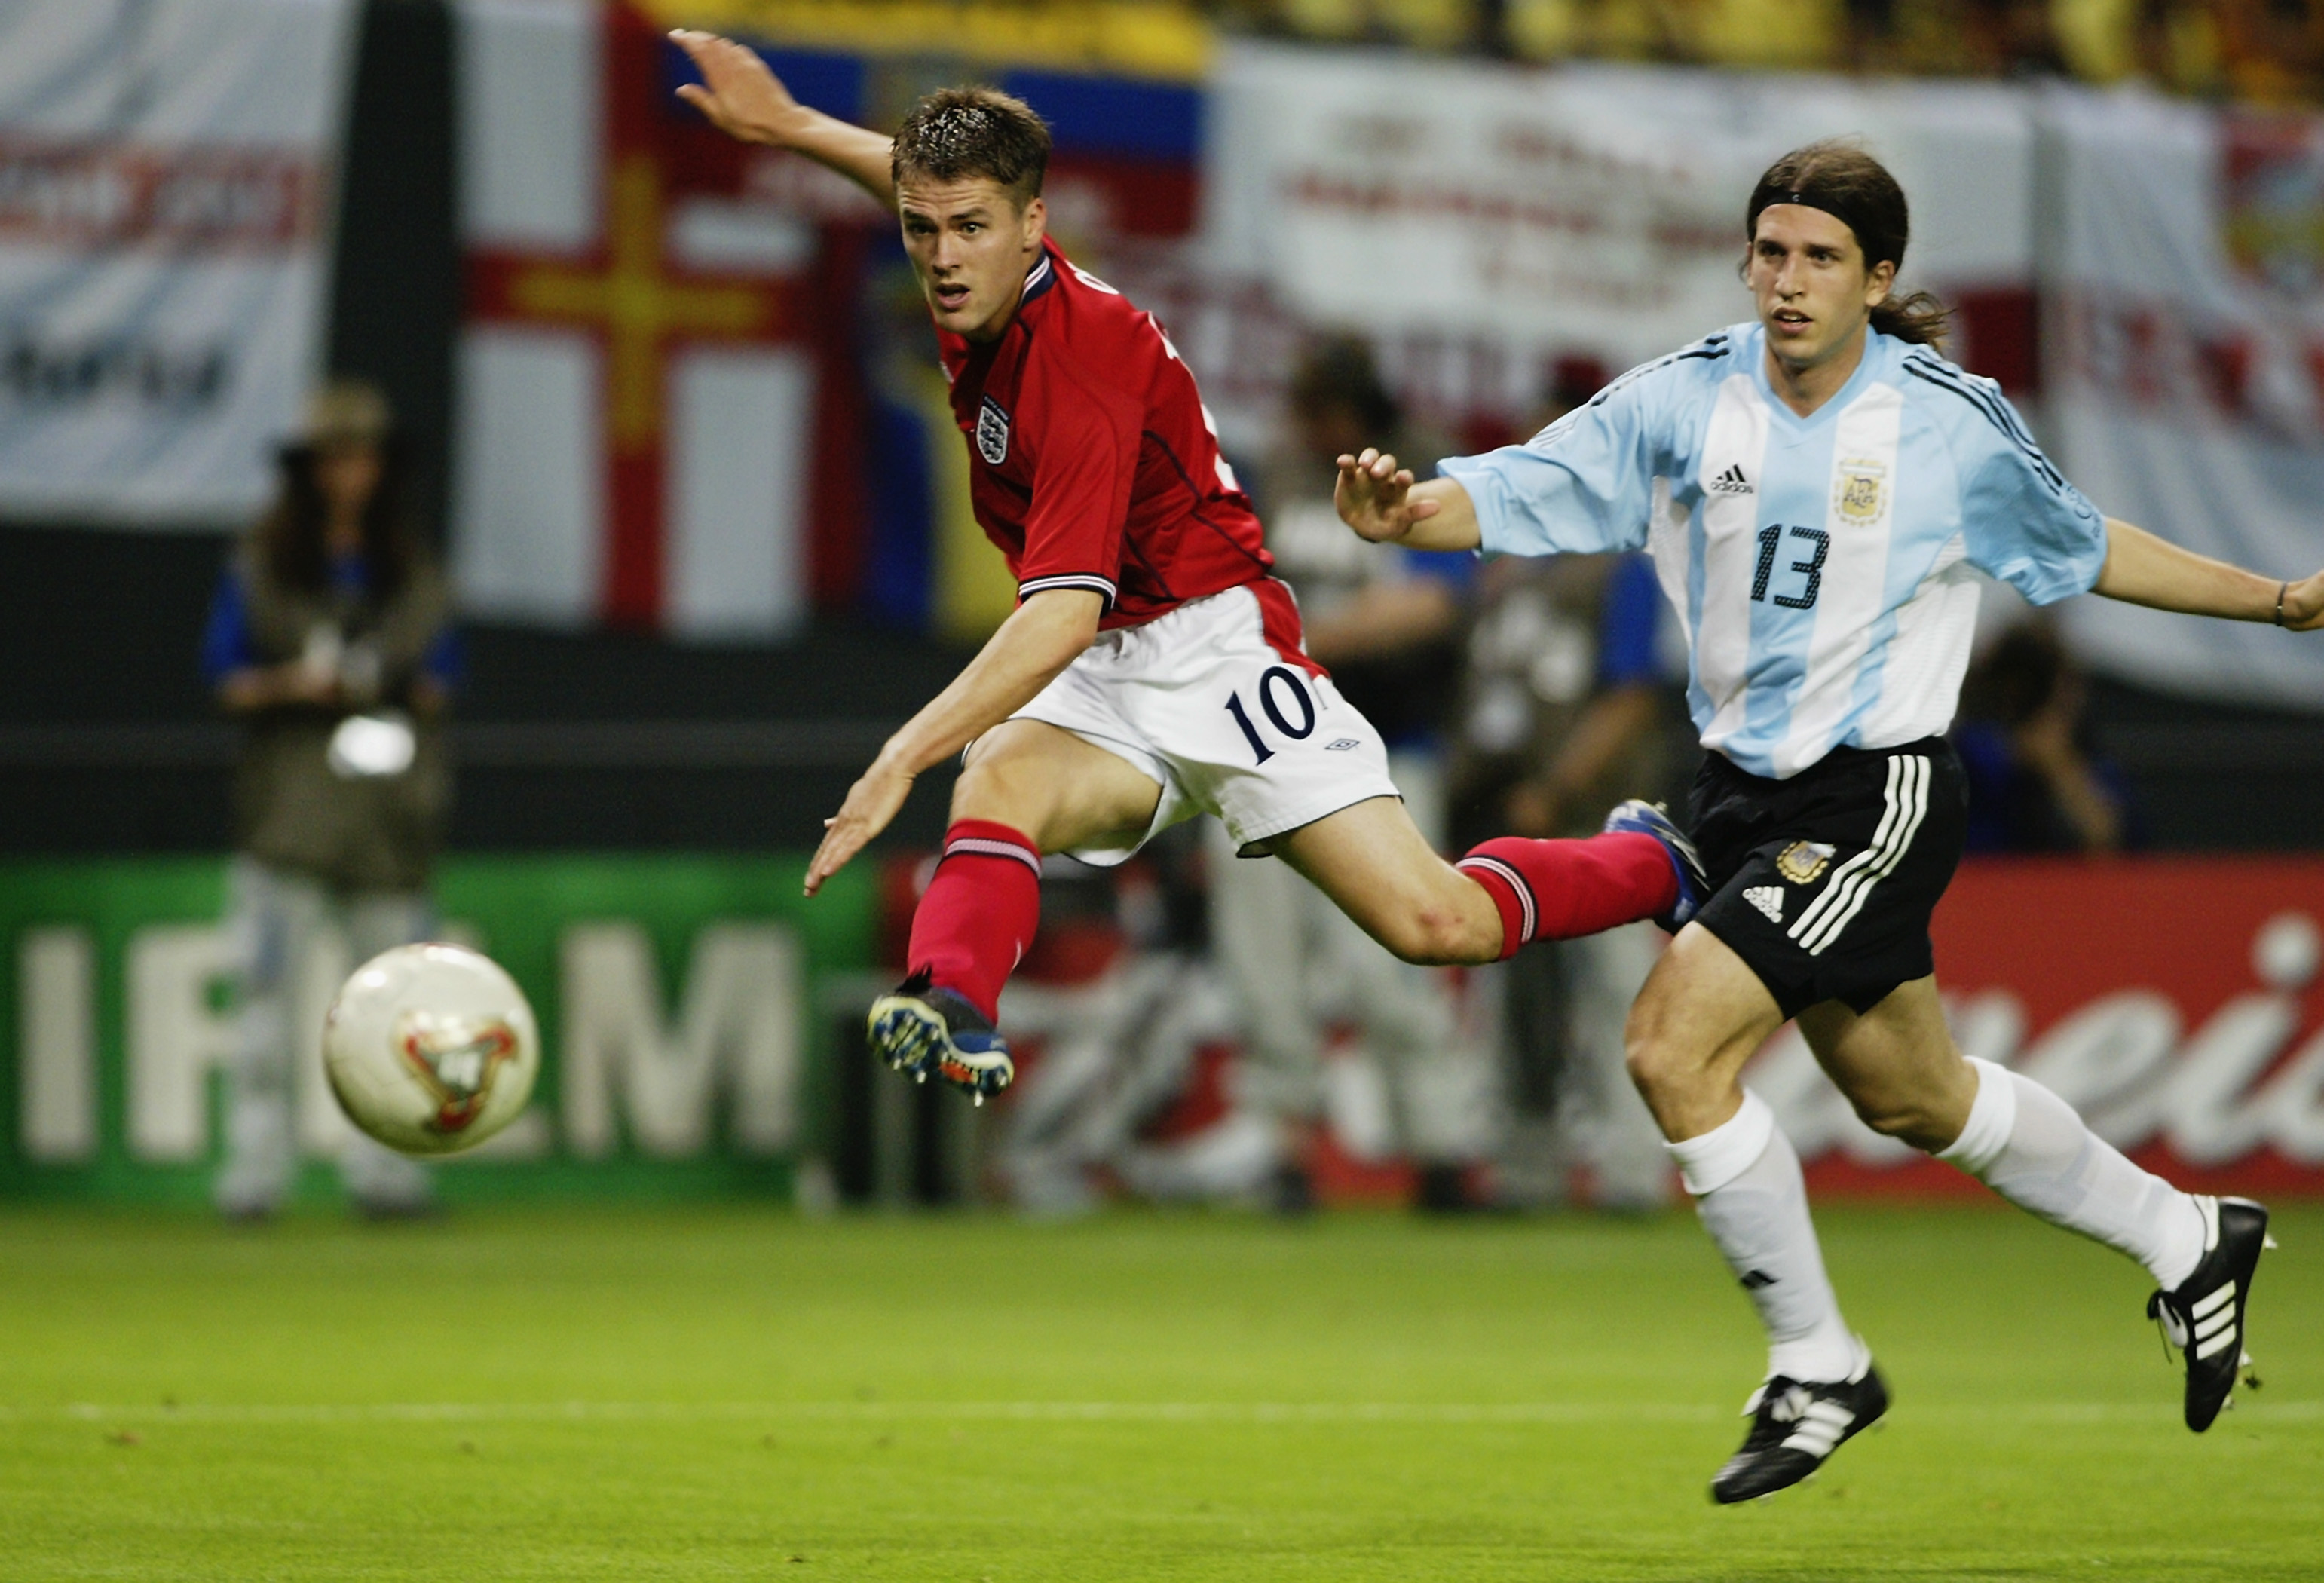 SAPPORO - JUNE 7:  Michael Owen (No.10) of England shoots towards goal while Diego Placente of Argentina looks on during the England v Argentina, Group F, World Cup Group Stage match played at the Sapporo Dome in Sapporo, Japan on June 7, 2002. England wo